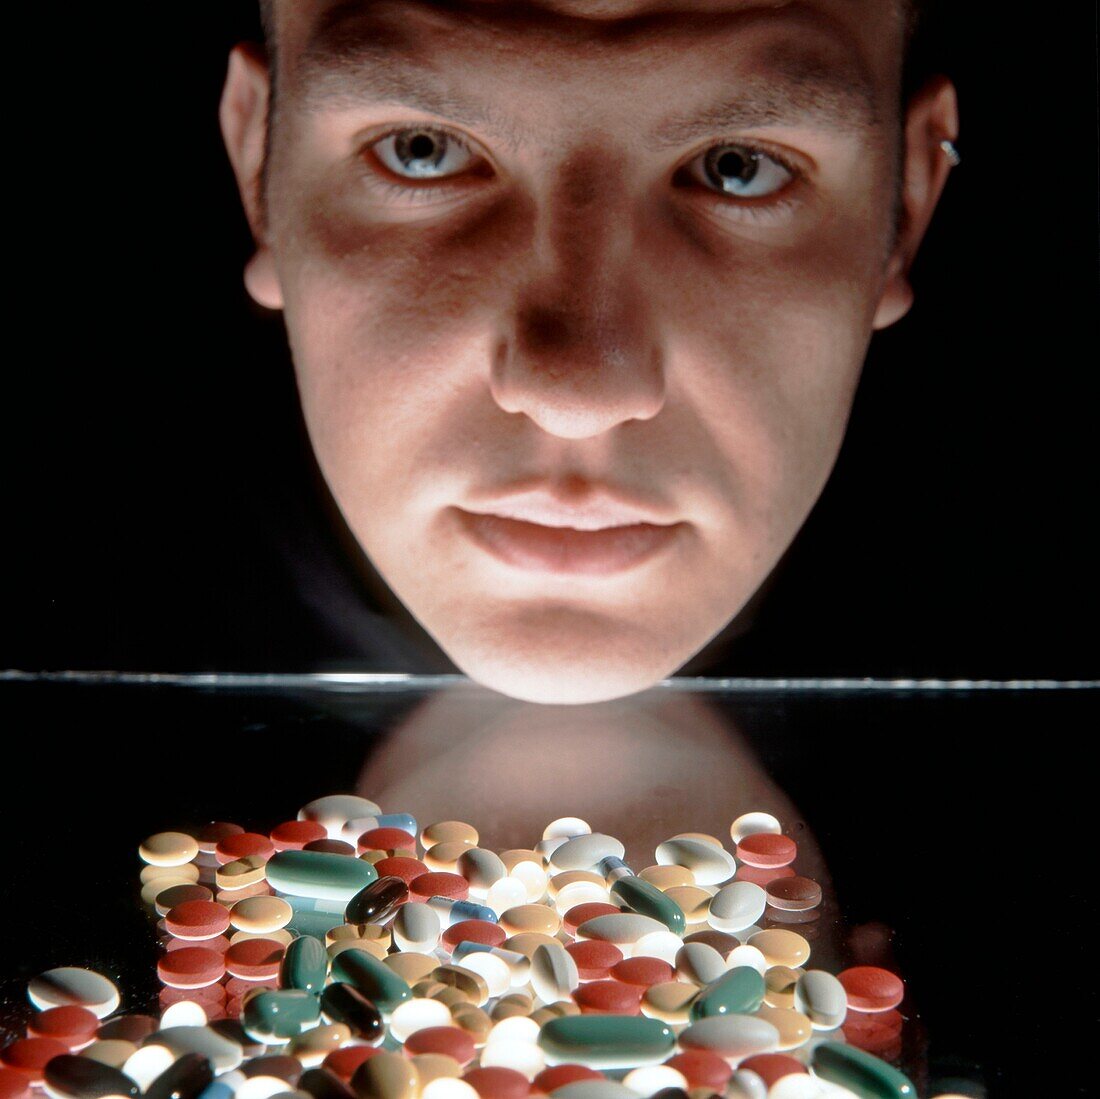 Male face with pills in foreground, Studio shot